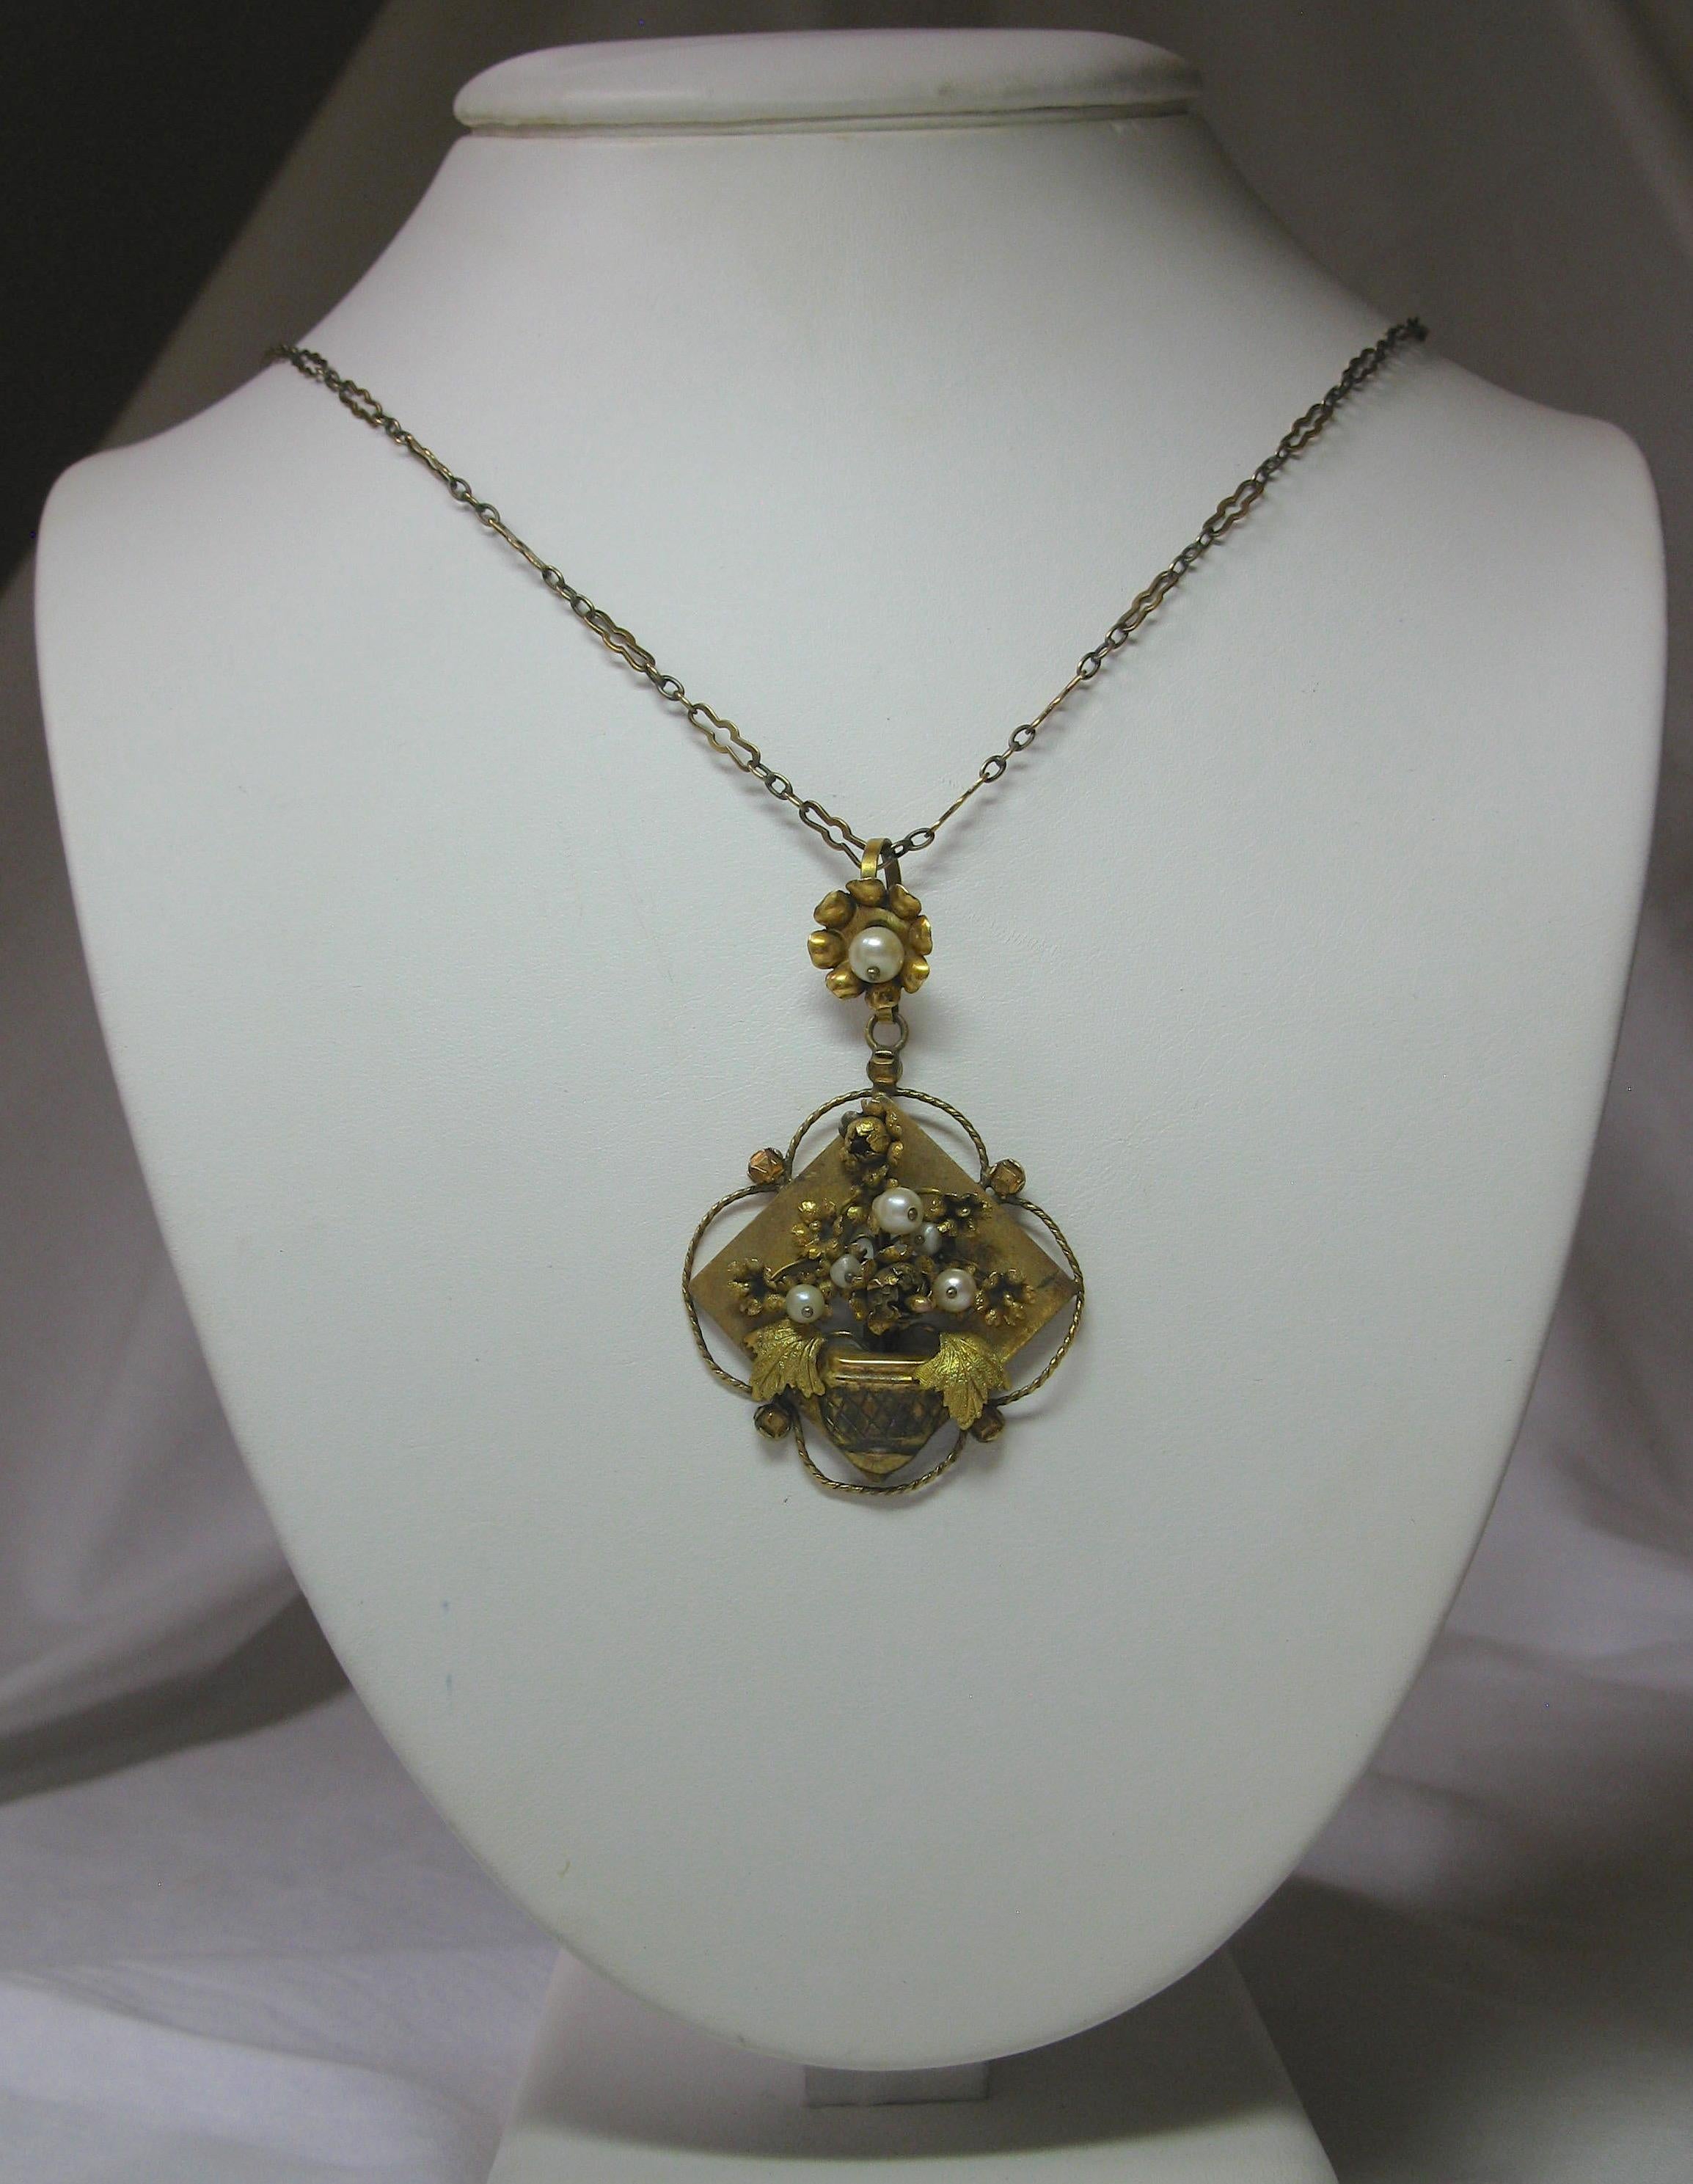 A very rare early antique Art Nouveau - Belle Epoque pendant necklace with a gorgeous three dimensional flower basket motif on an original gold chain.  From the Tuscany region of Italy, probably Florence or Arezzo.   The stunning gold is 12 Karat